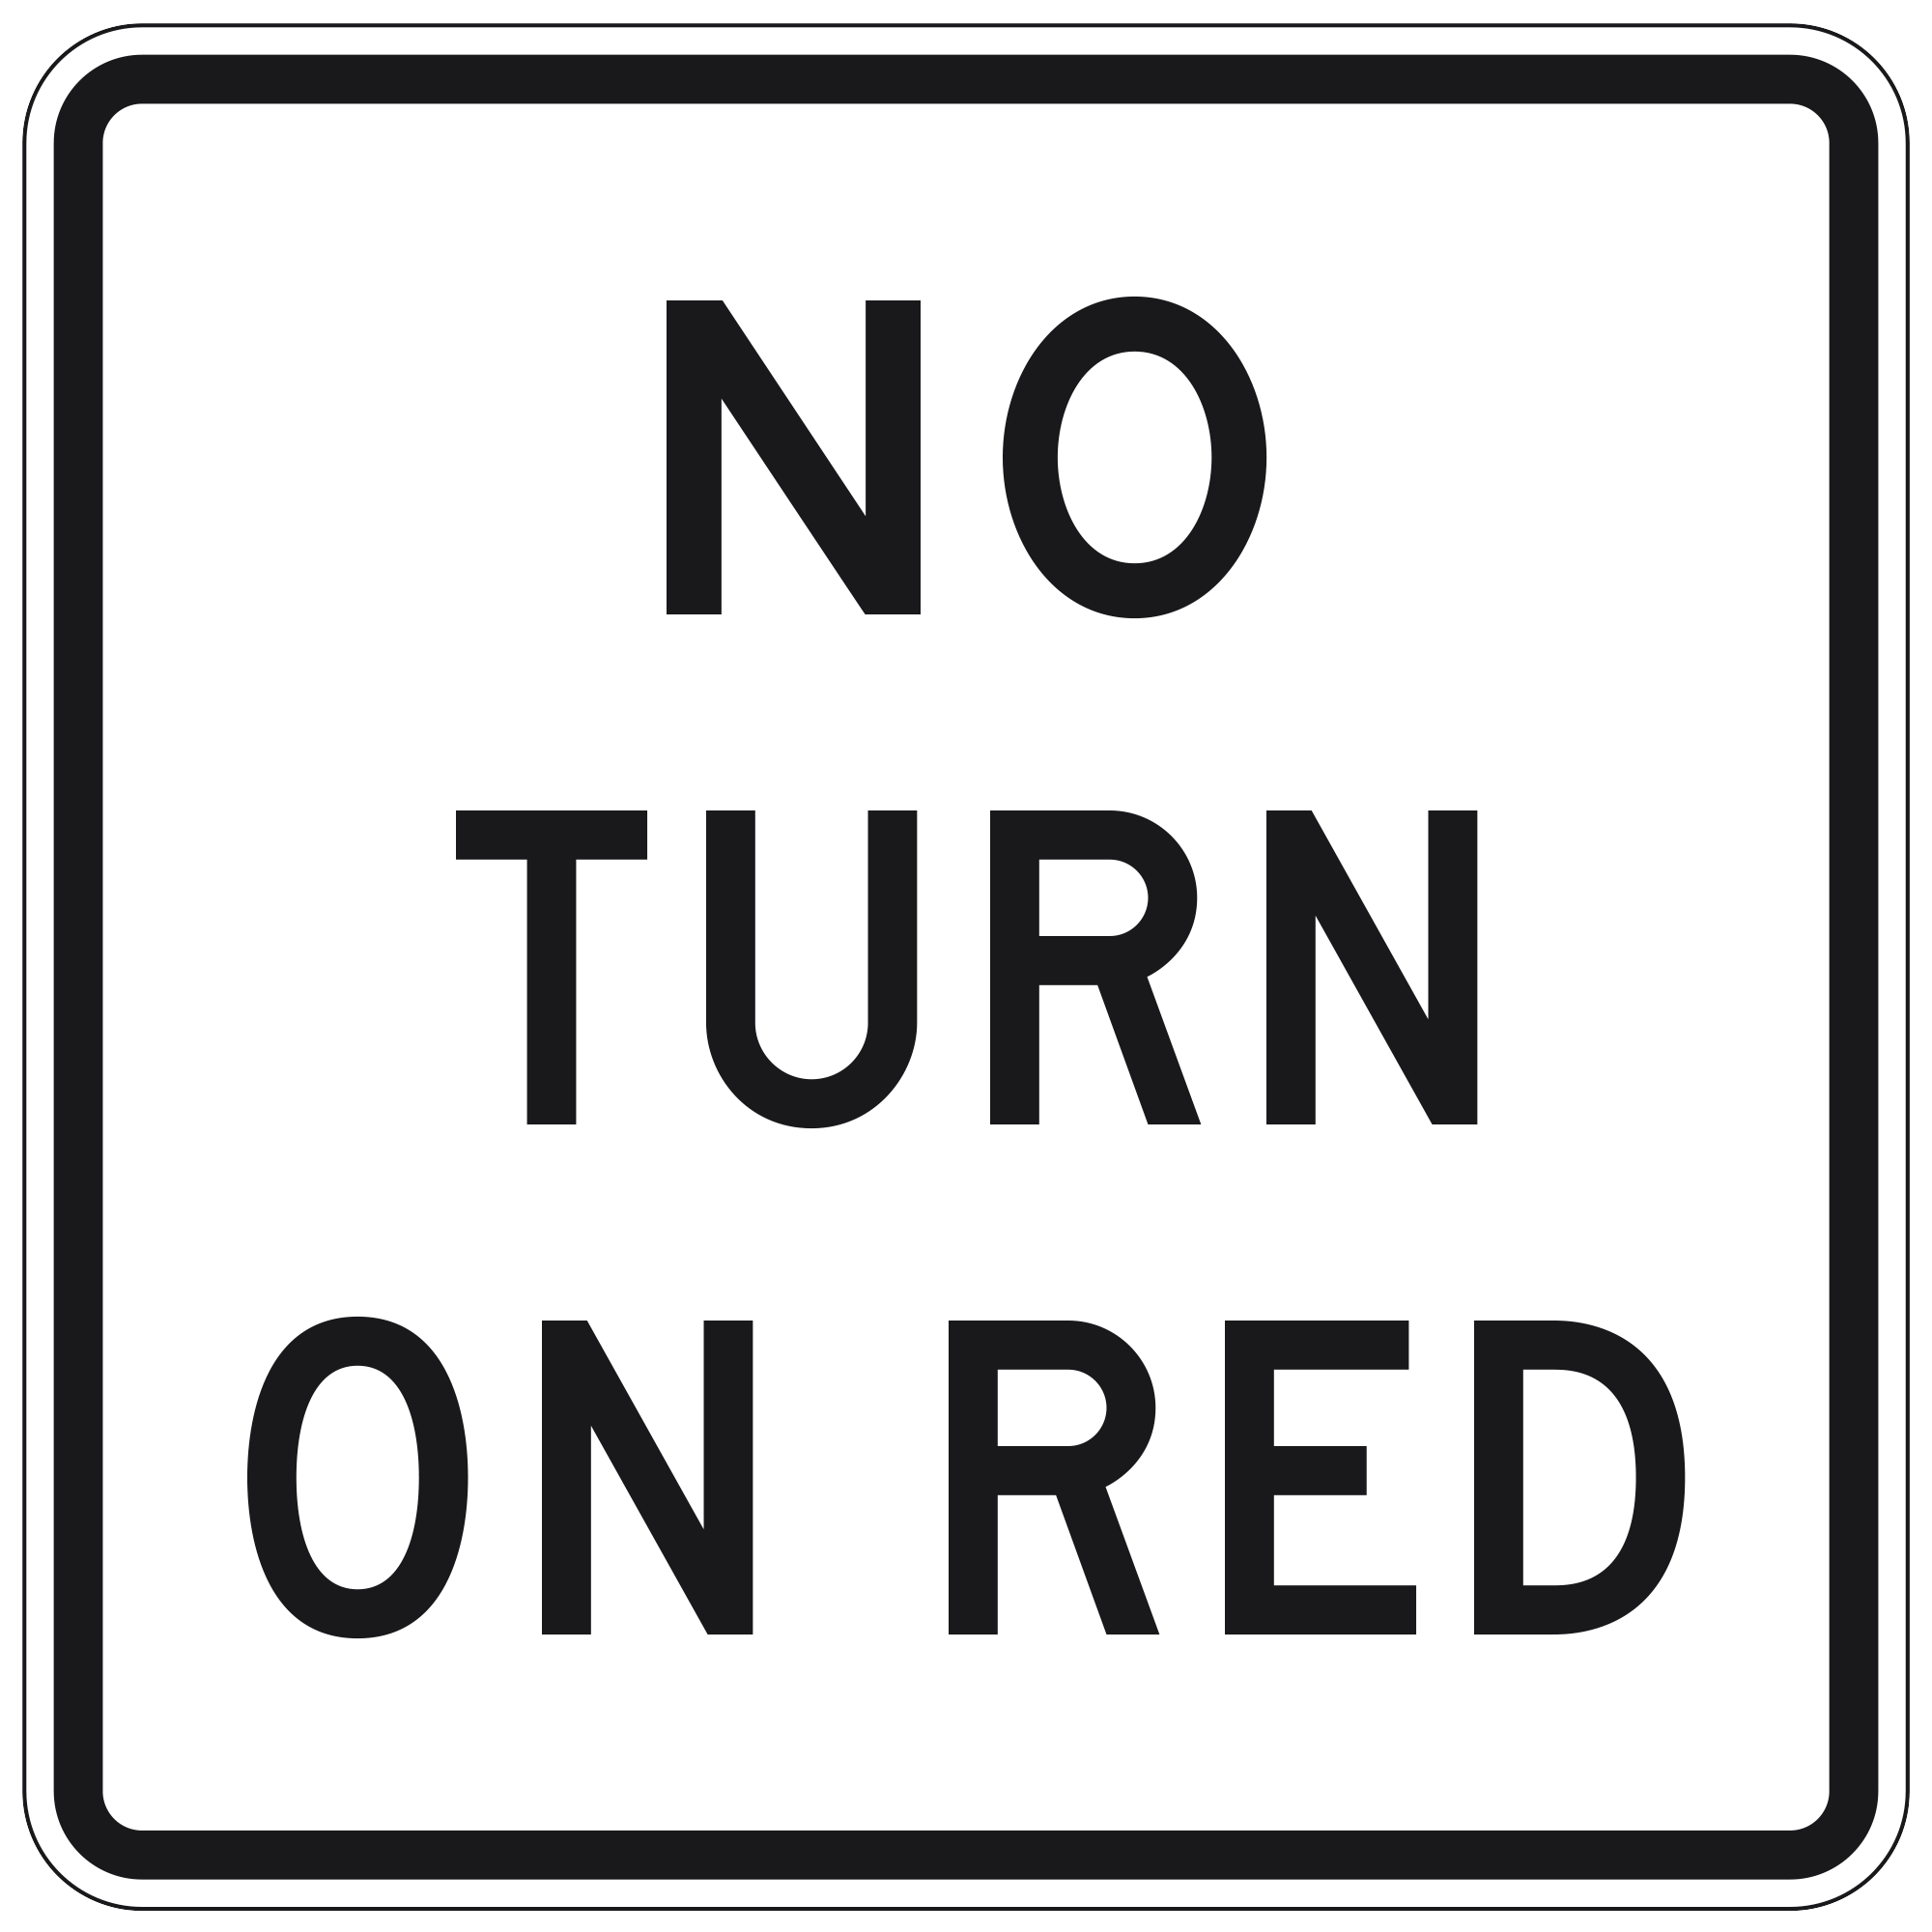 No Turn on Red signal - Imagine from www.trafficsign.us